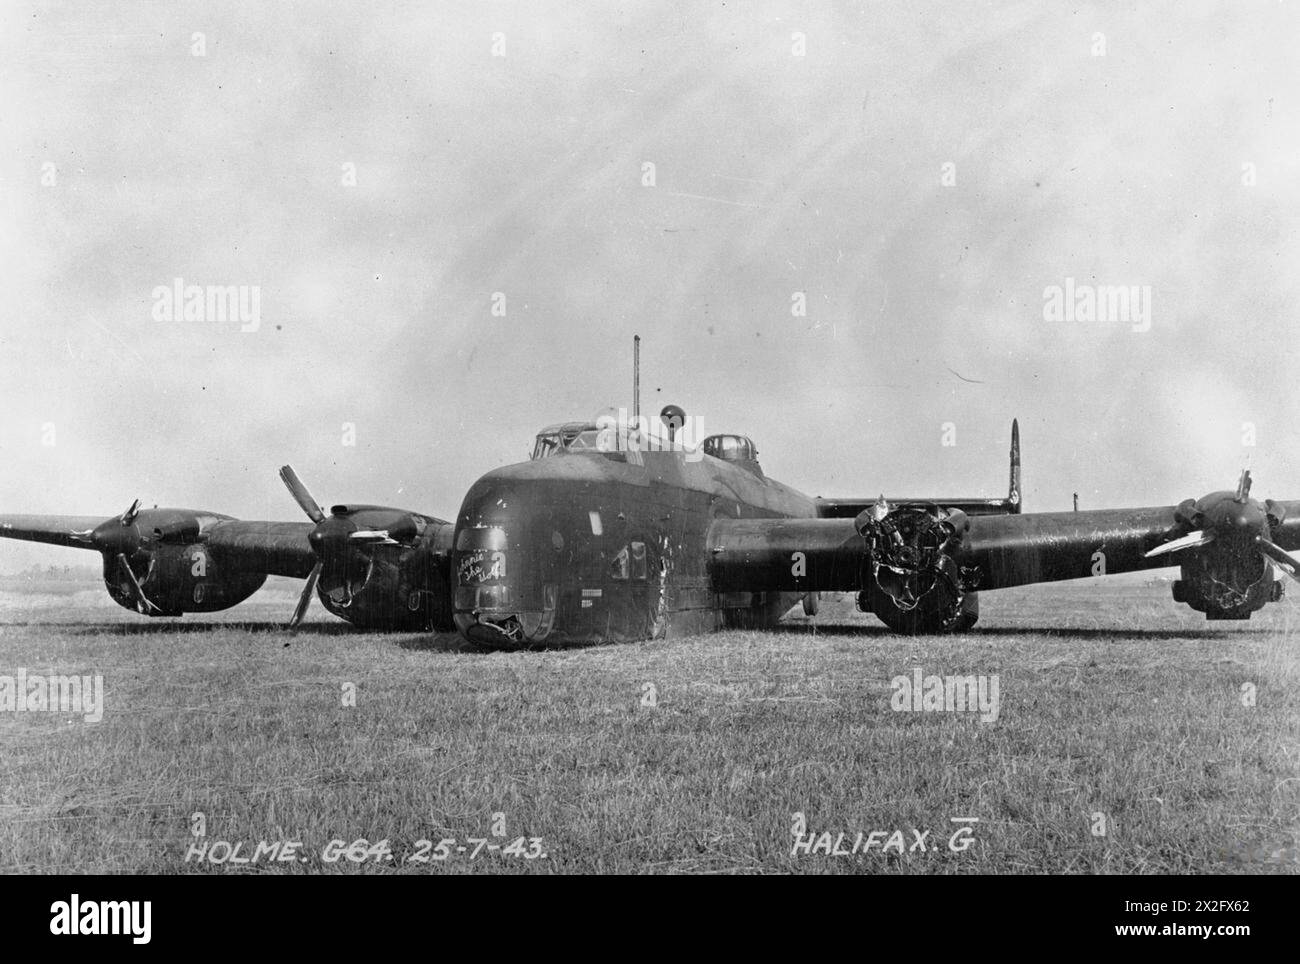 ROYAL AIR FORCE BOMBER COMMAND, 1942-1945. - Handley Page Halifax B Mark II Series I (Special), DK148 'MP-G' 'Johnnie the Wolf', of No. 76 Squadron RAF rests at Holme-on-Spalding Moor, Yorkshire, after crash-landing on return from an operation to Essen on the night of 25/26 July 1943. The propeller from the damaged port-inner engine flew off shortly after the bombing run, tearing a large hole in the fuselage. The mid-upper gunner immediately baled out, but the pilot, Flight Lieutenant C M Shannon, regained control of the aircraft and managed to bring the rest of the crew back to Holme, althoug Stock Photo